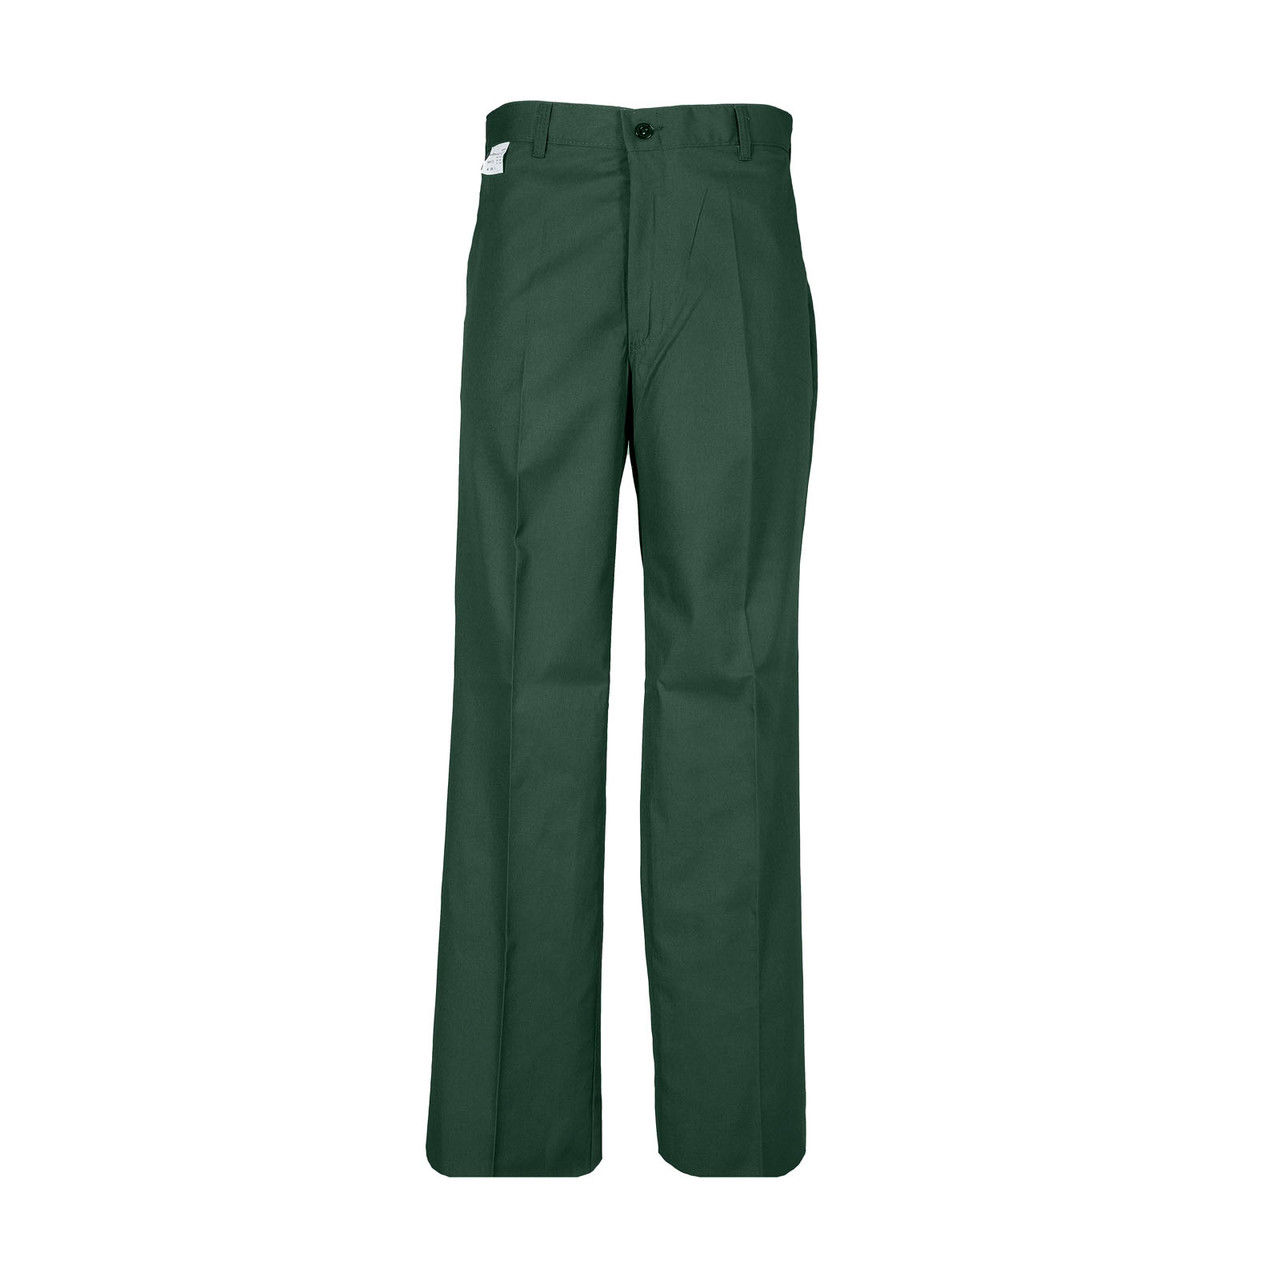 Can green work pants be returned if they are customized?